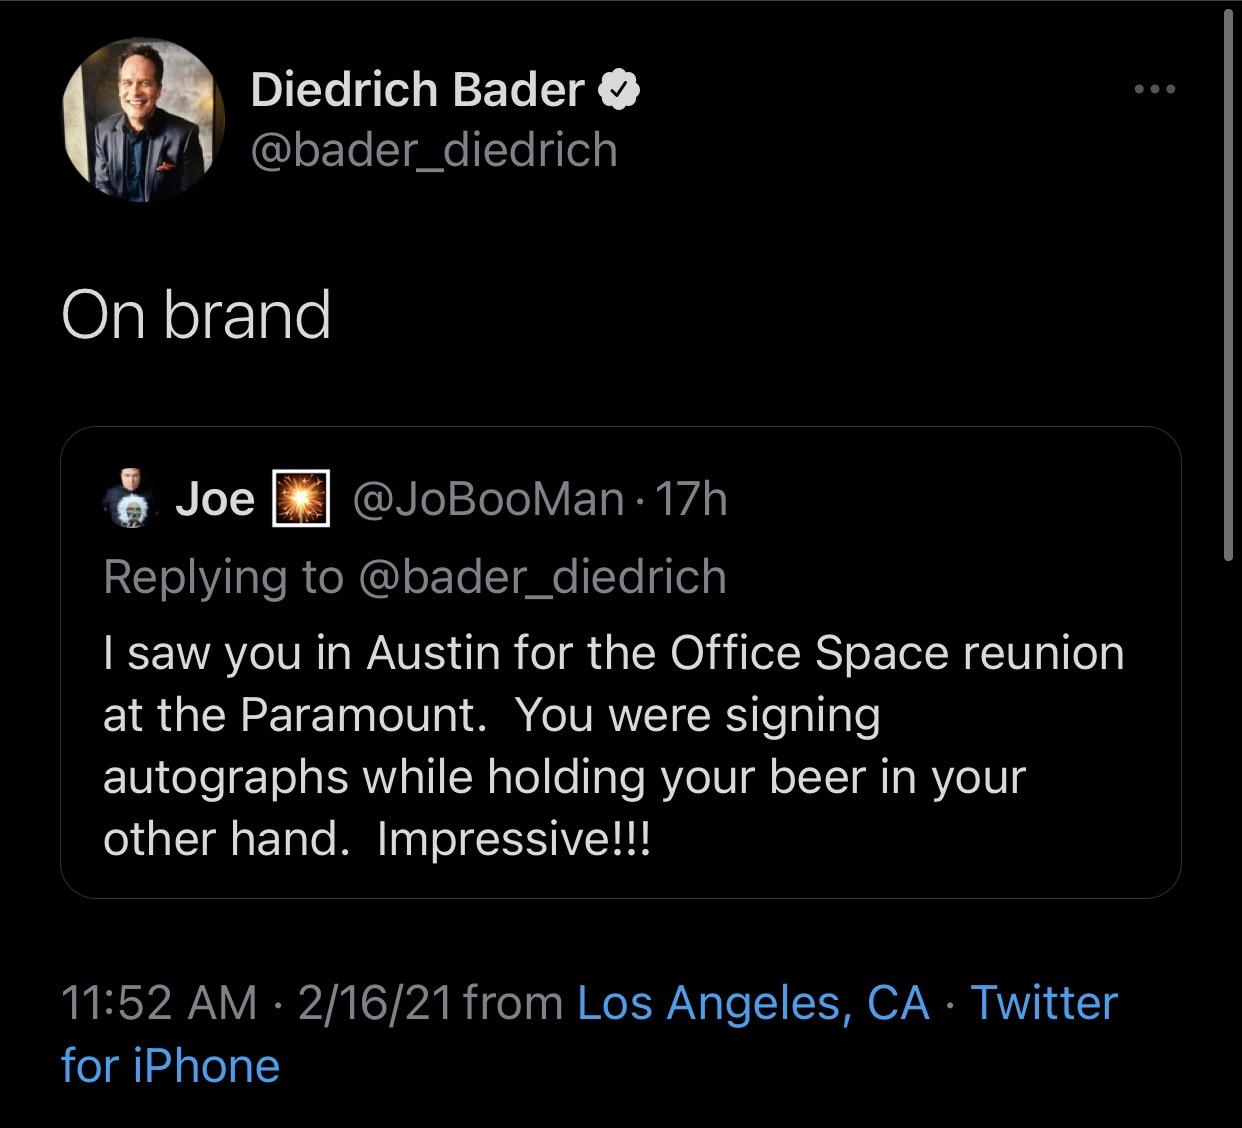 screenshot - Diedrich Bader On brand Joe 17h I saw you in Austin for the Office Space reunion at the Paramount. You were signing autographs while holding your beer in your other hand. Impressive!!! 21621 from Los Angeles, Ca Twitter for iPhone